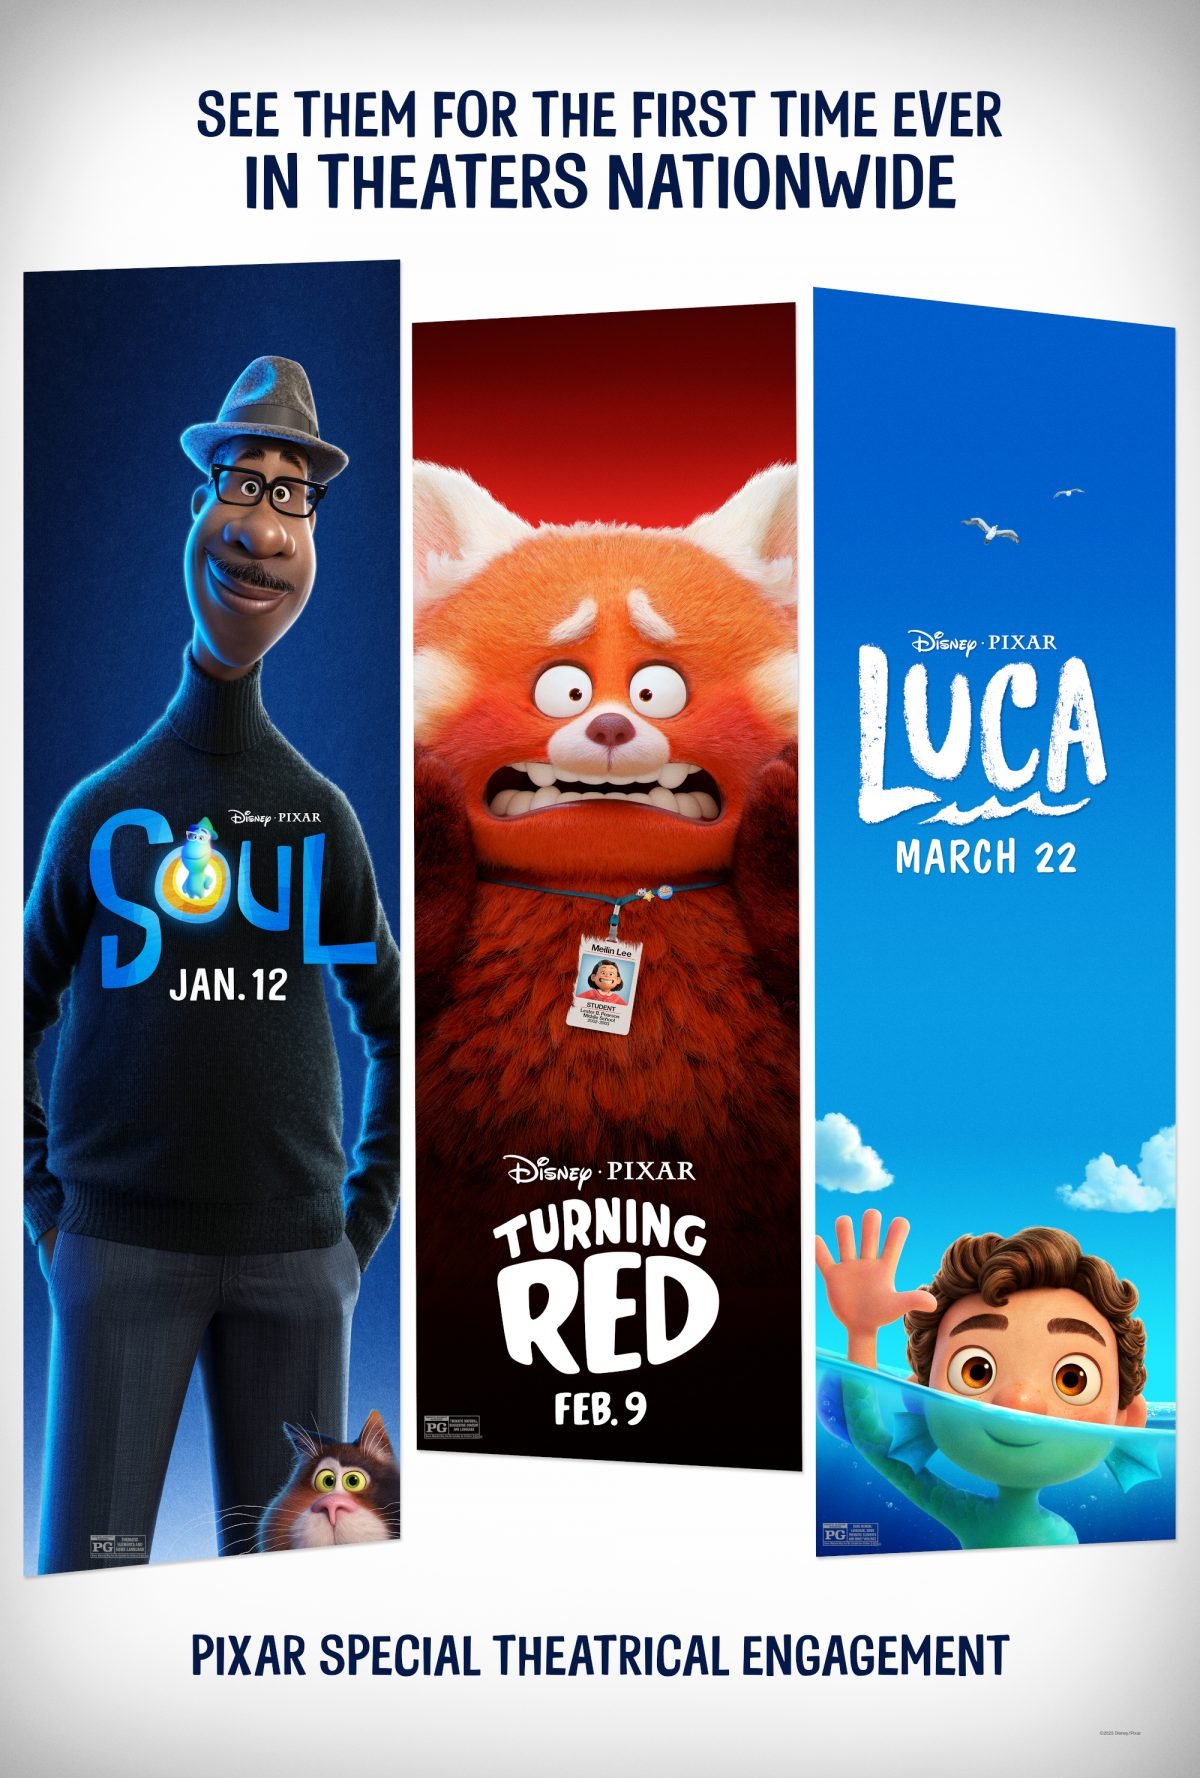 A trio of posters for Soul, Turning Red, and Luca showing the release dates for the Pixar movies in theaters